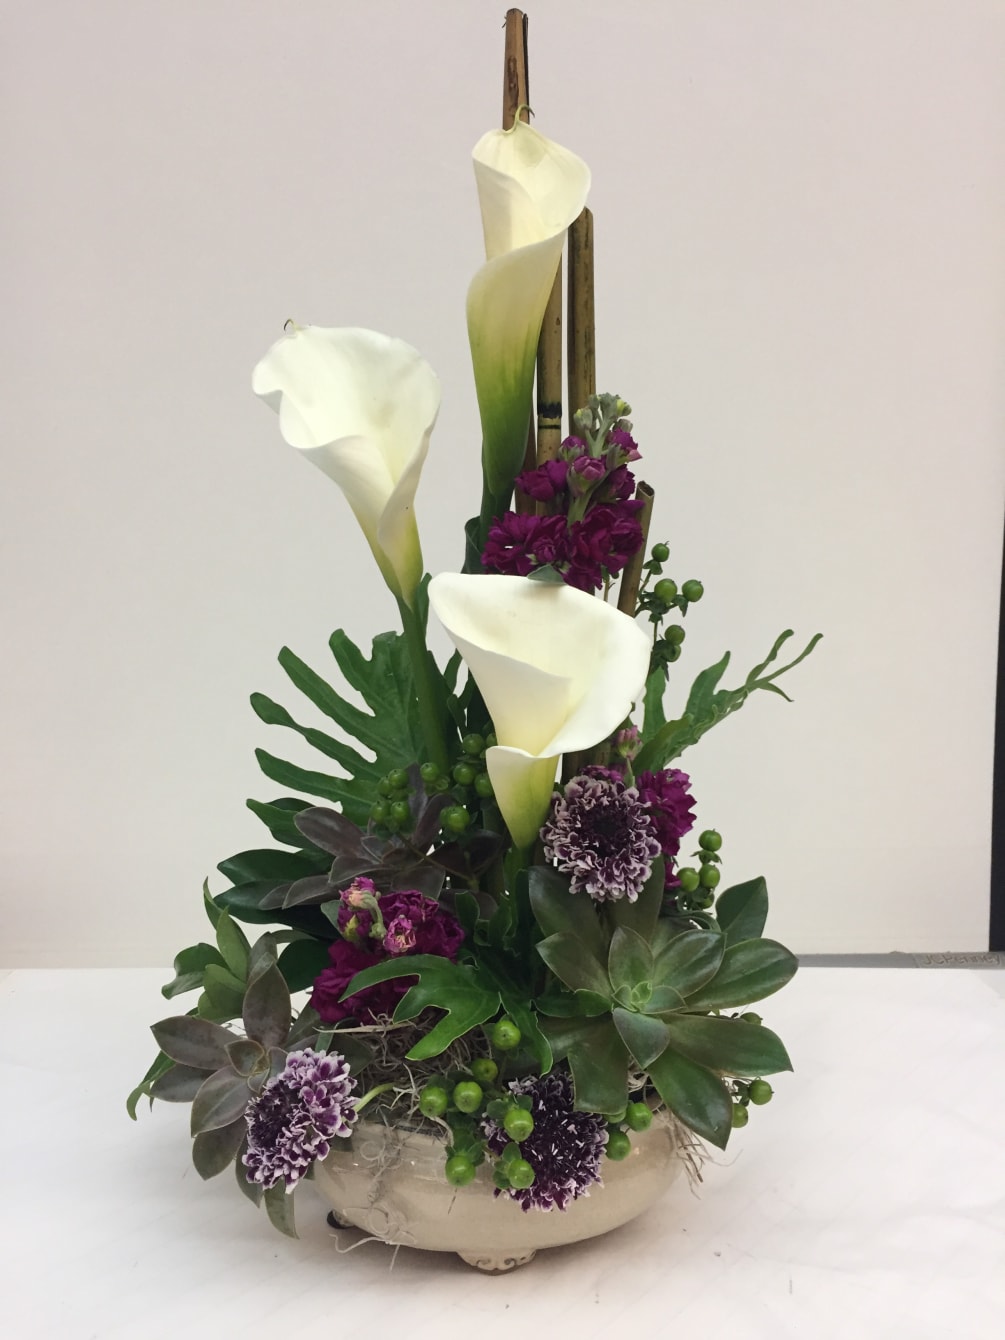 Lush tropical arrangement, comes in a variety of lush greens and blooms